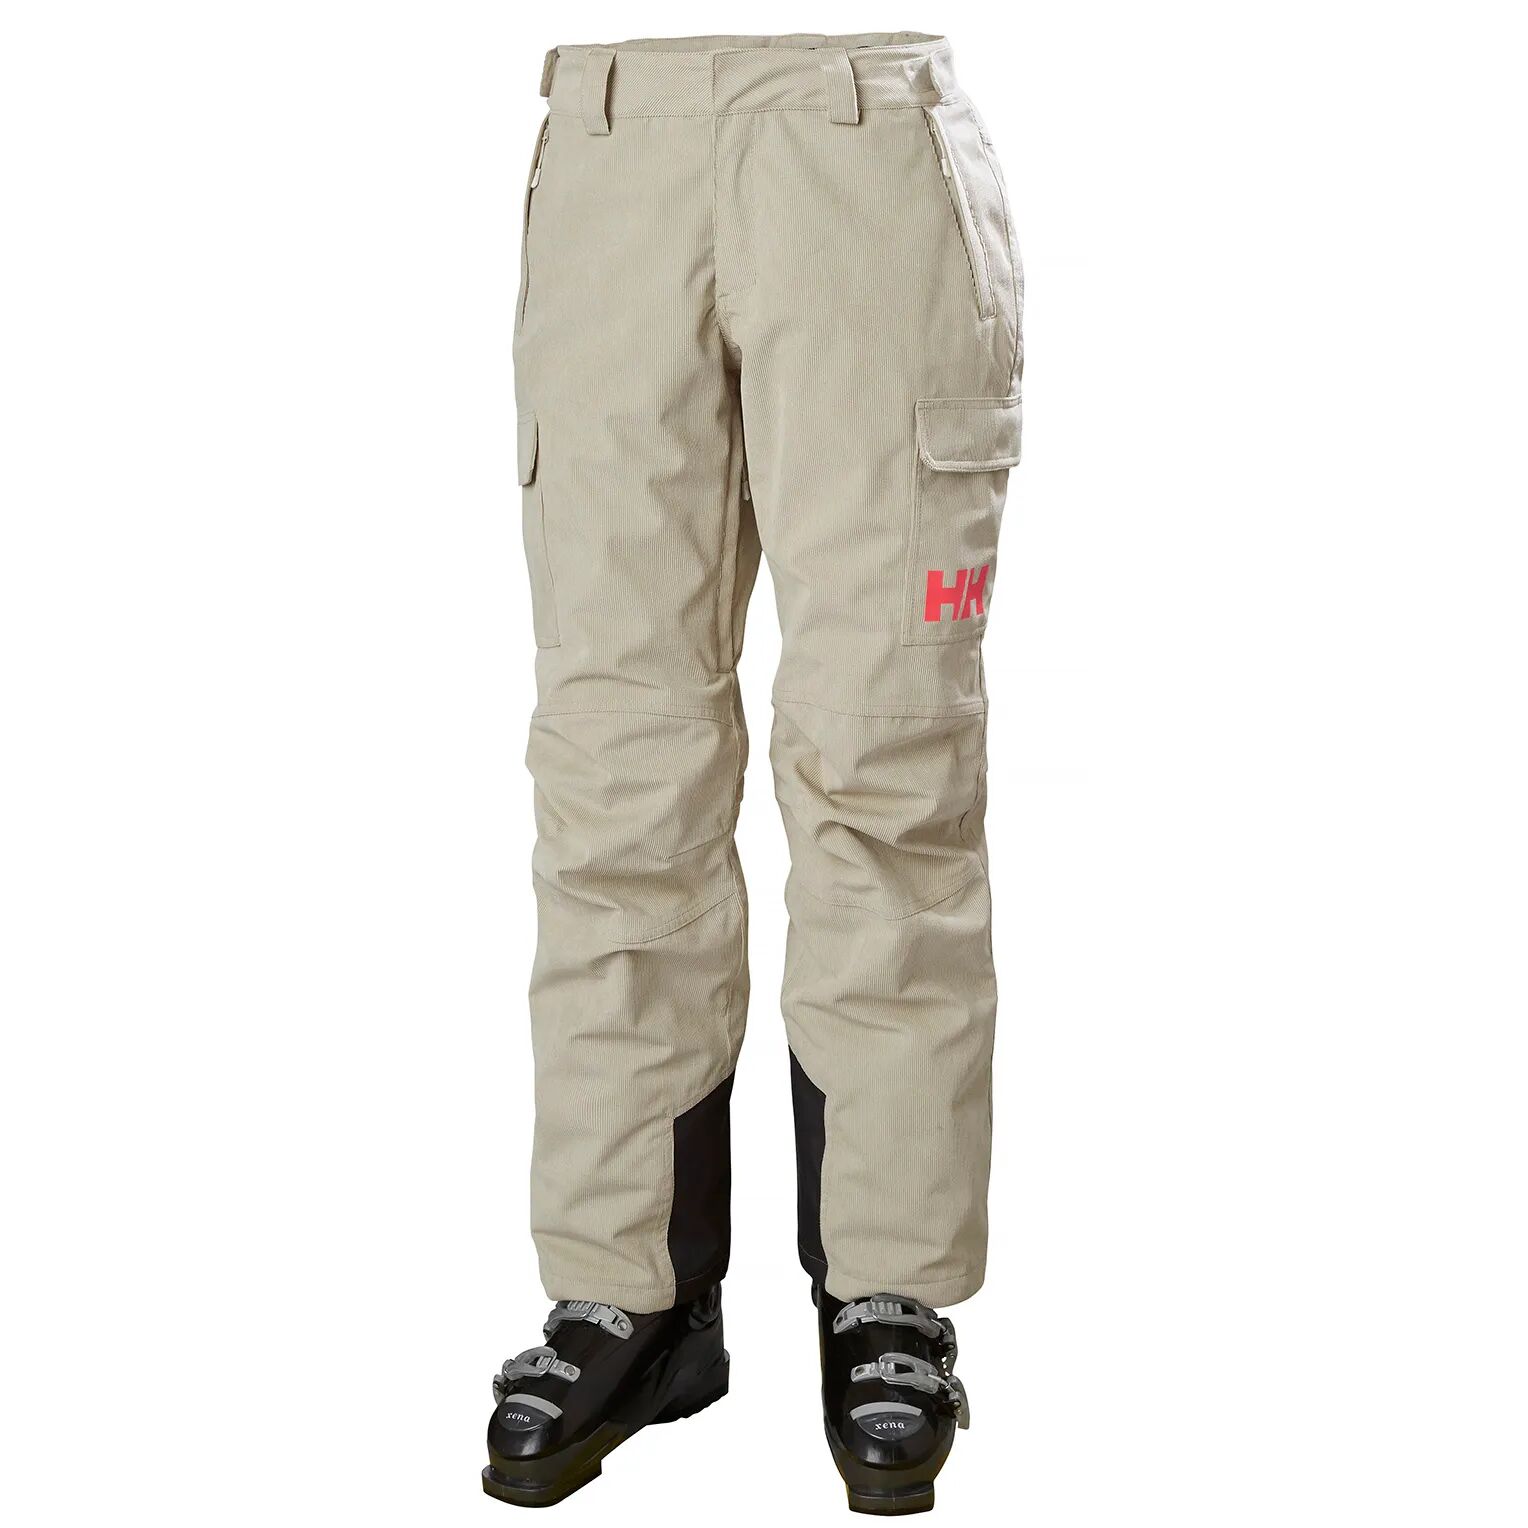 Helly Hansen Dame Switch Cargo Insulated Trousers Skibukse Beige XL